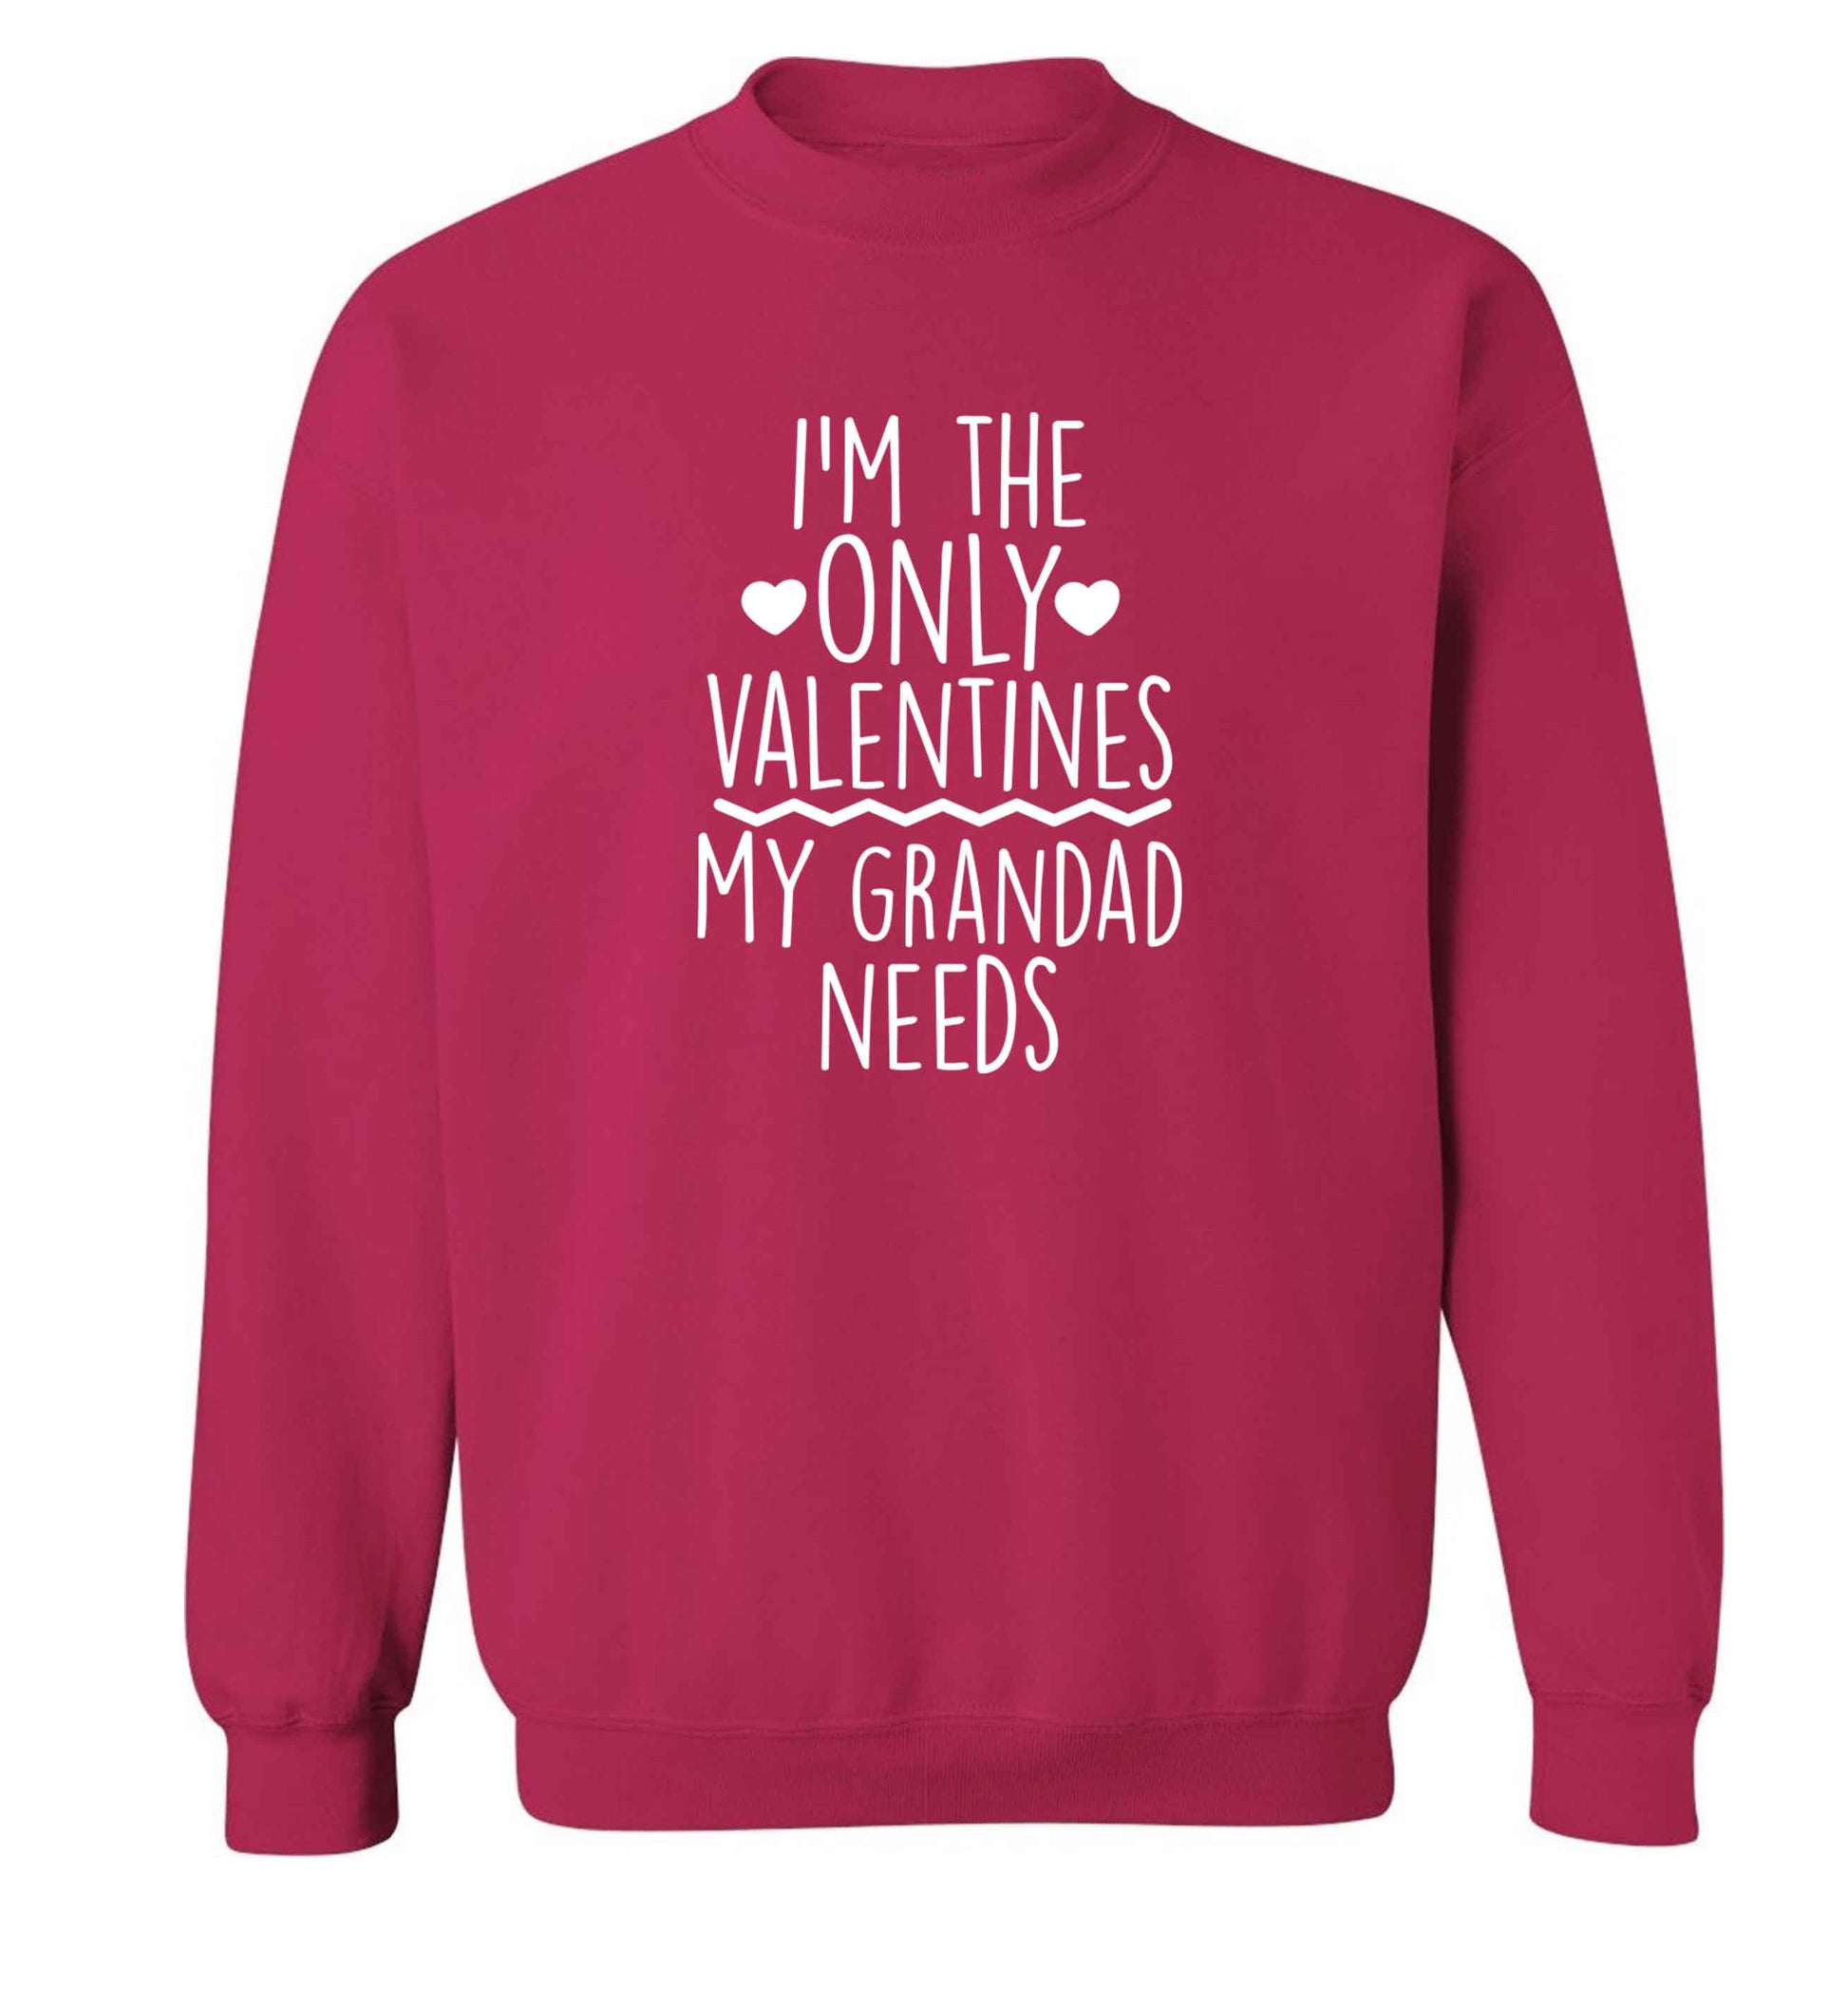 I'm the only valentines my grandad needs adult's unisex pink sweater 2XL